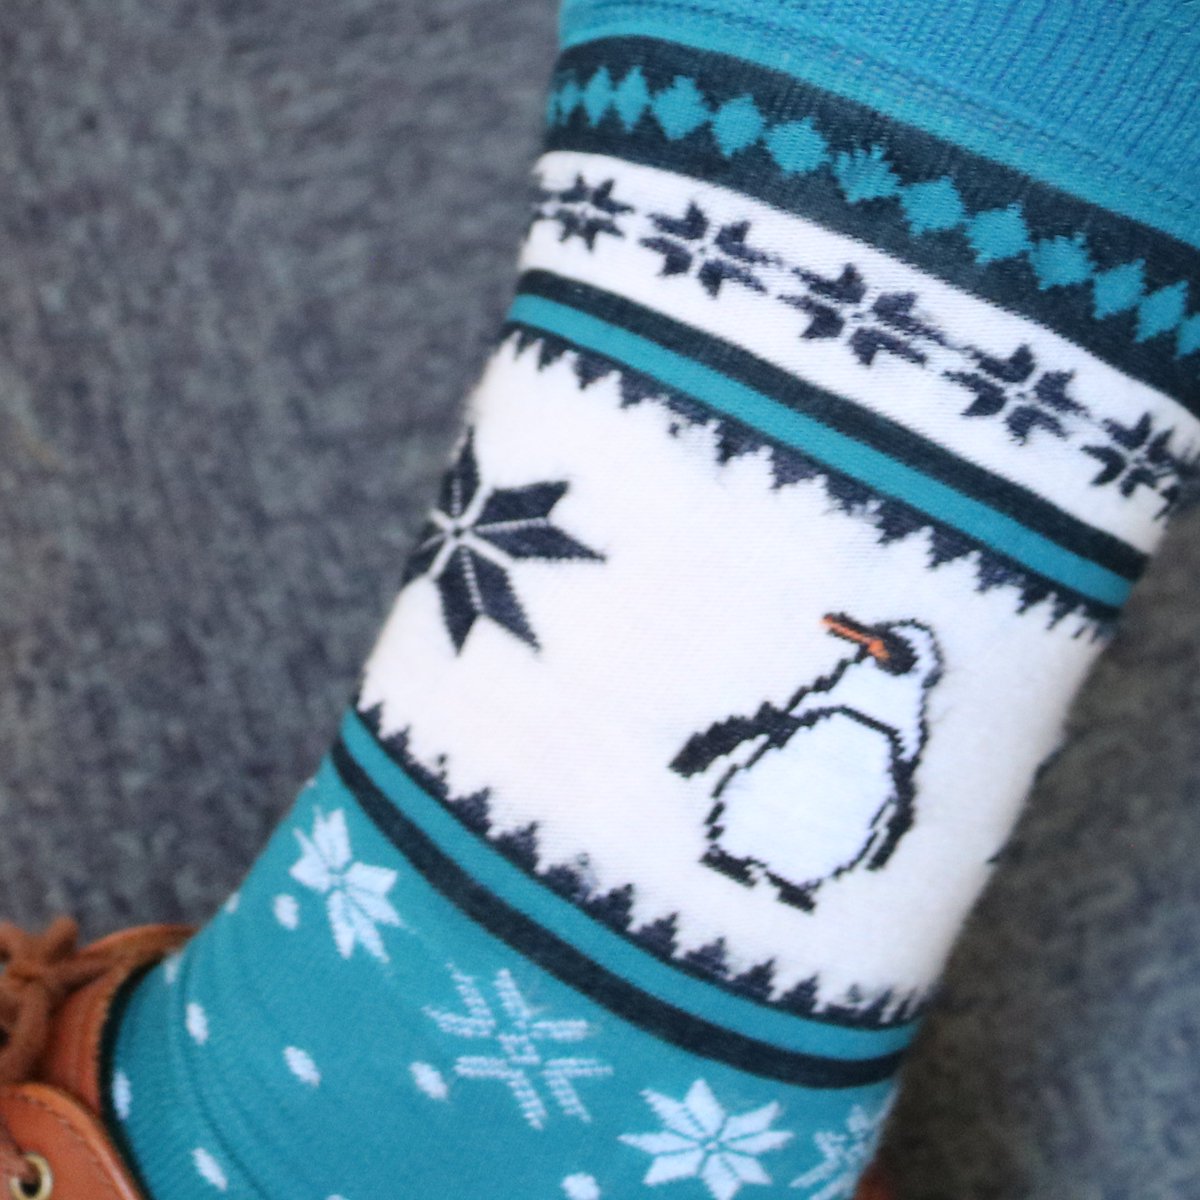 There's some brilliant #Polar themed clothing at SPRI today! A king #penguin tie👔, cetacean jumper🐳, and penguin socks🐧! #clothes #winterfashion #outfits #winterclothes